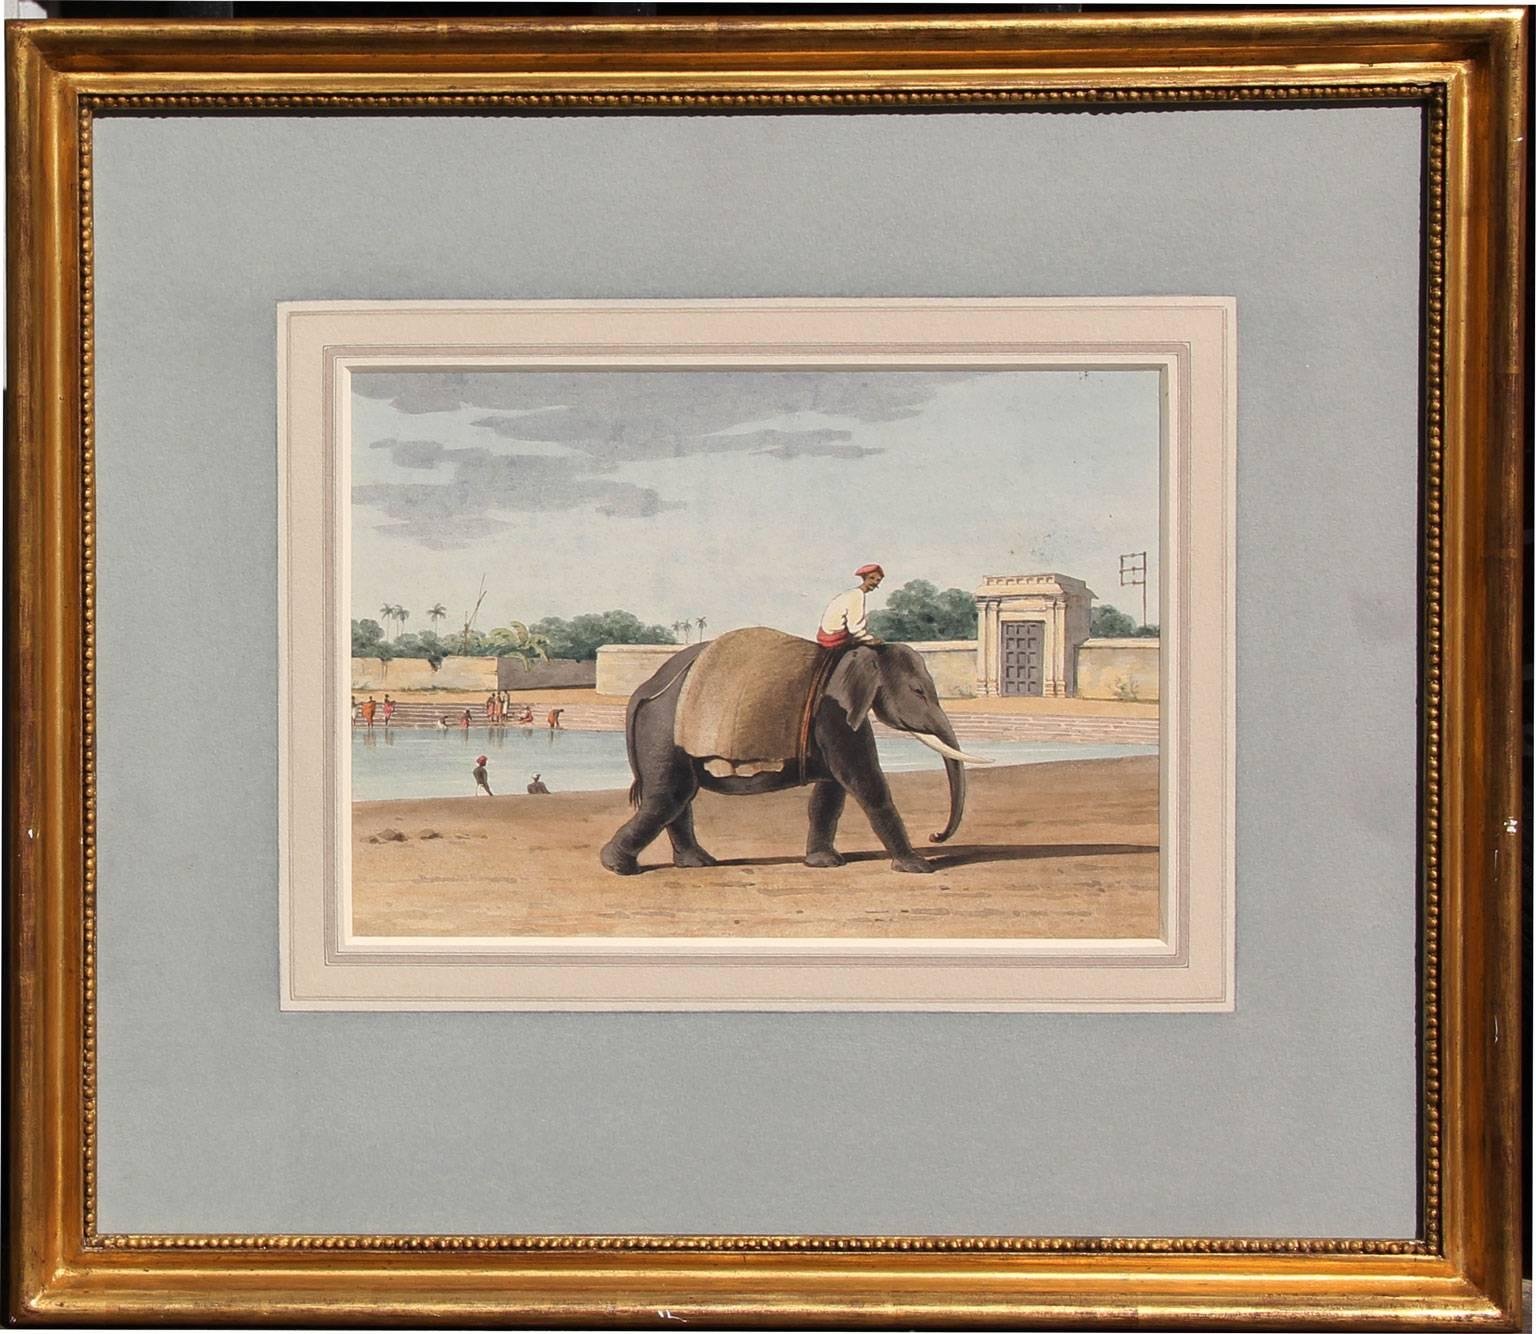 An Elephant by the River, Madras, Watercolor on Paper, 1828 - Art by John Gantz